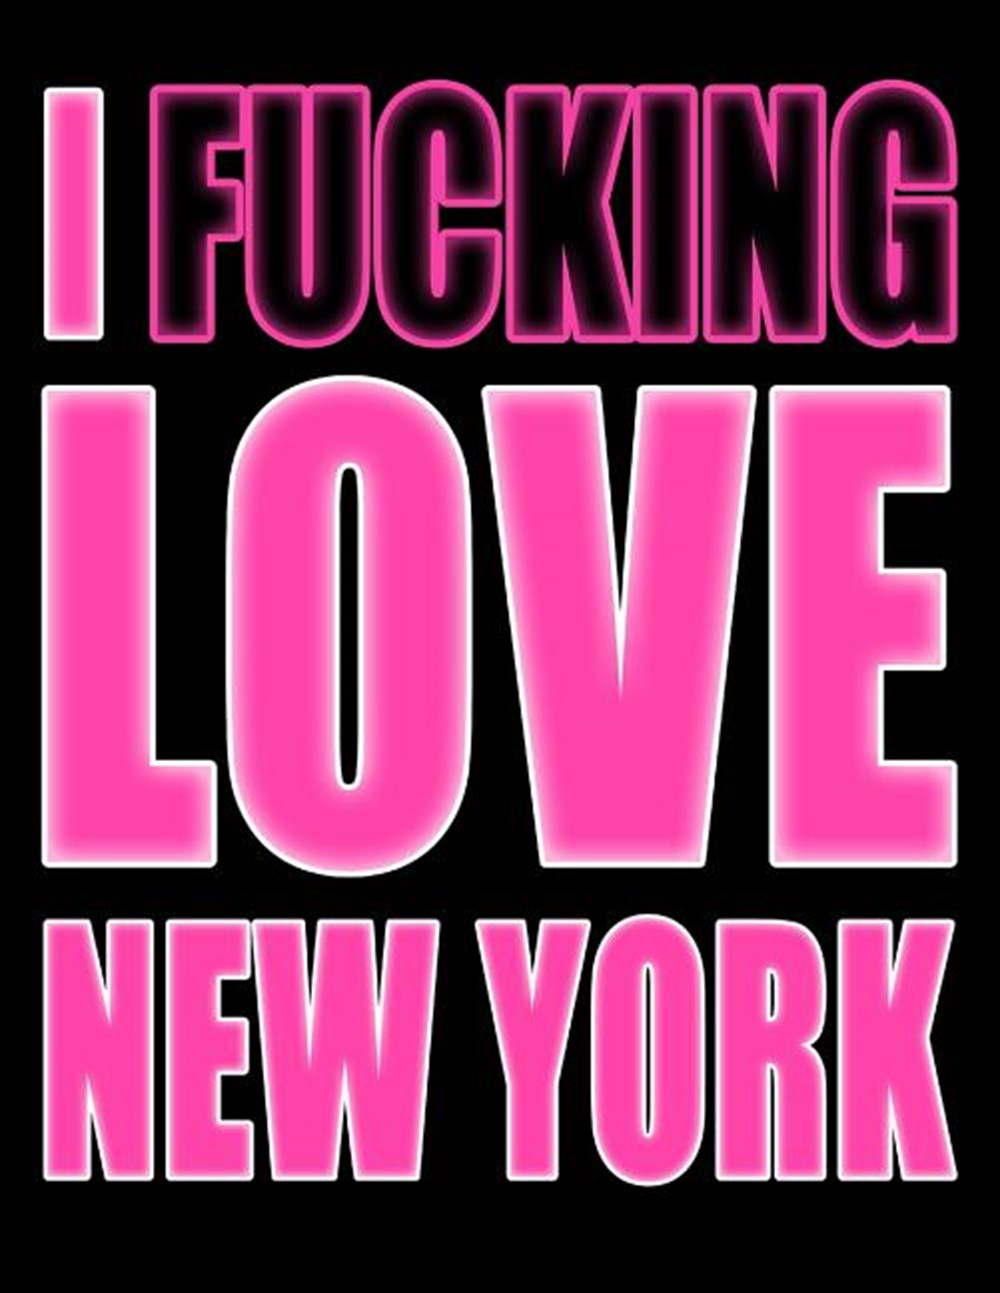 I Fucking Love New York: You Could Rip Off All Your Clothes and Shout Your Feelings to the World...o